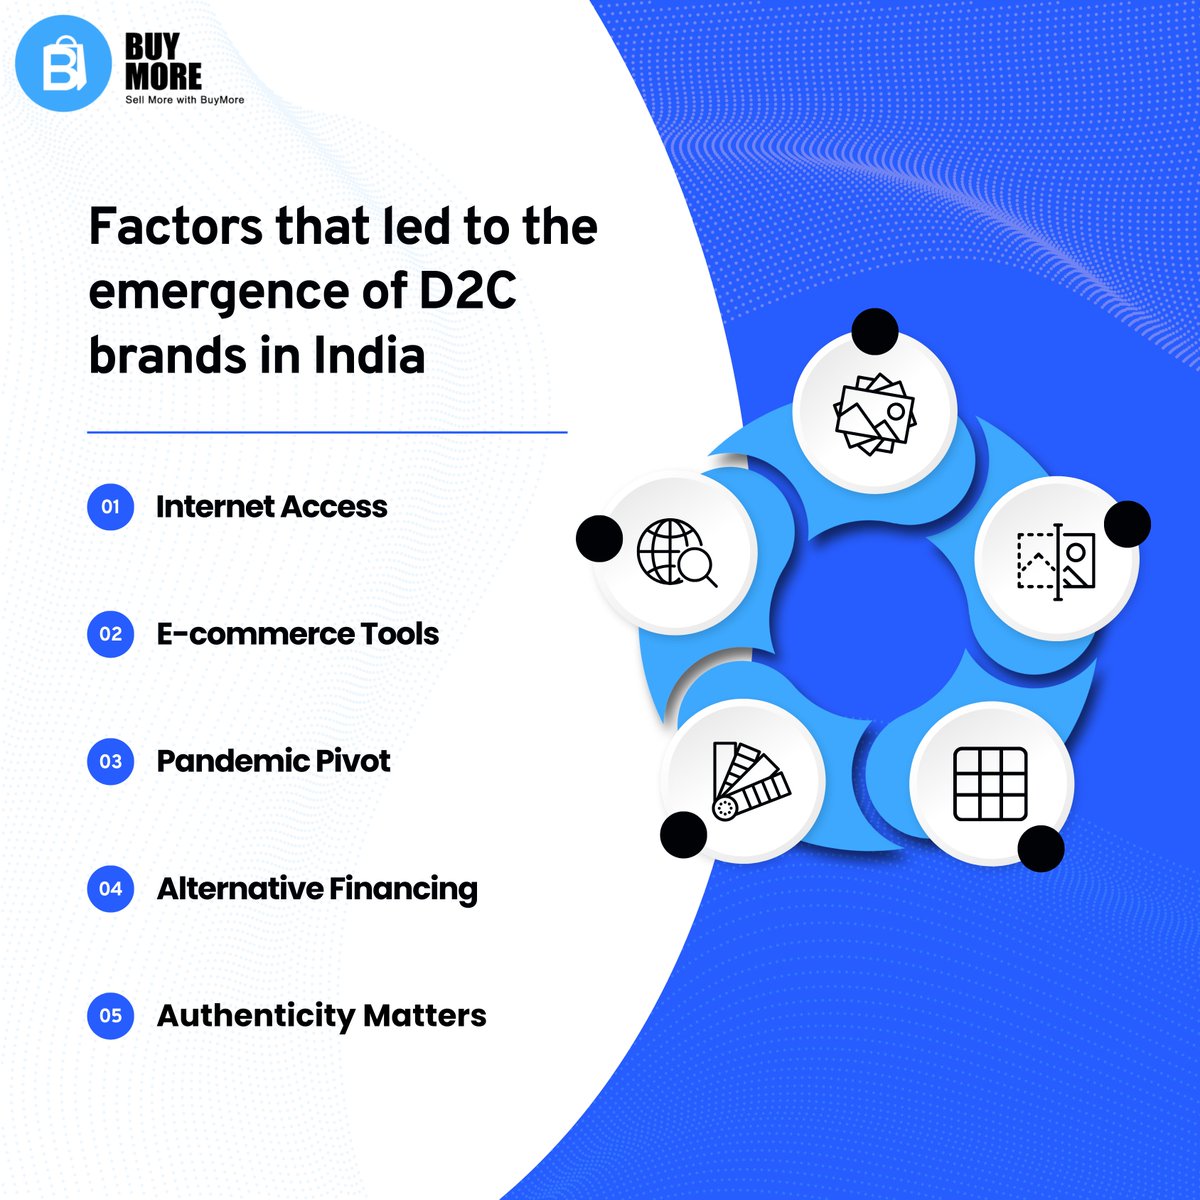 🚀 Factors that have led to the emergence of Direct-to-Consumer (D2C) brands in India! 🛒

#D2C #Ecommerce #OnlineShopping #InternetAccess #DigitalTransformation #RetailRevolution #ConsumerDemands #DigitalCommerce #BrandAwareness #RetailSales #OnlineSales #DirectSales #BuyMore